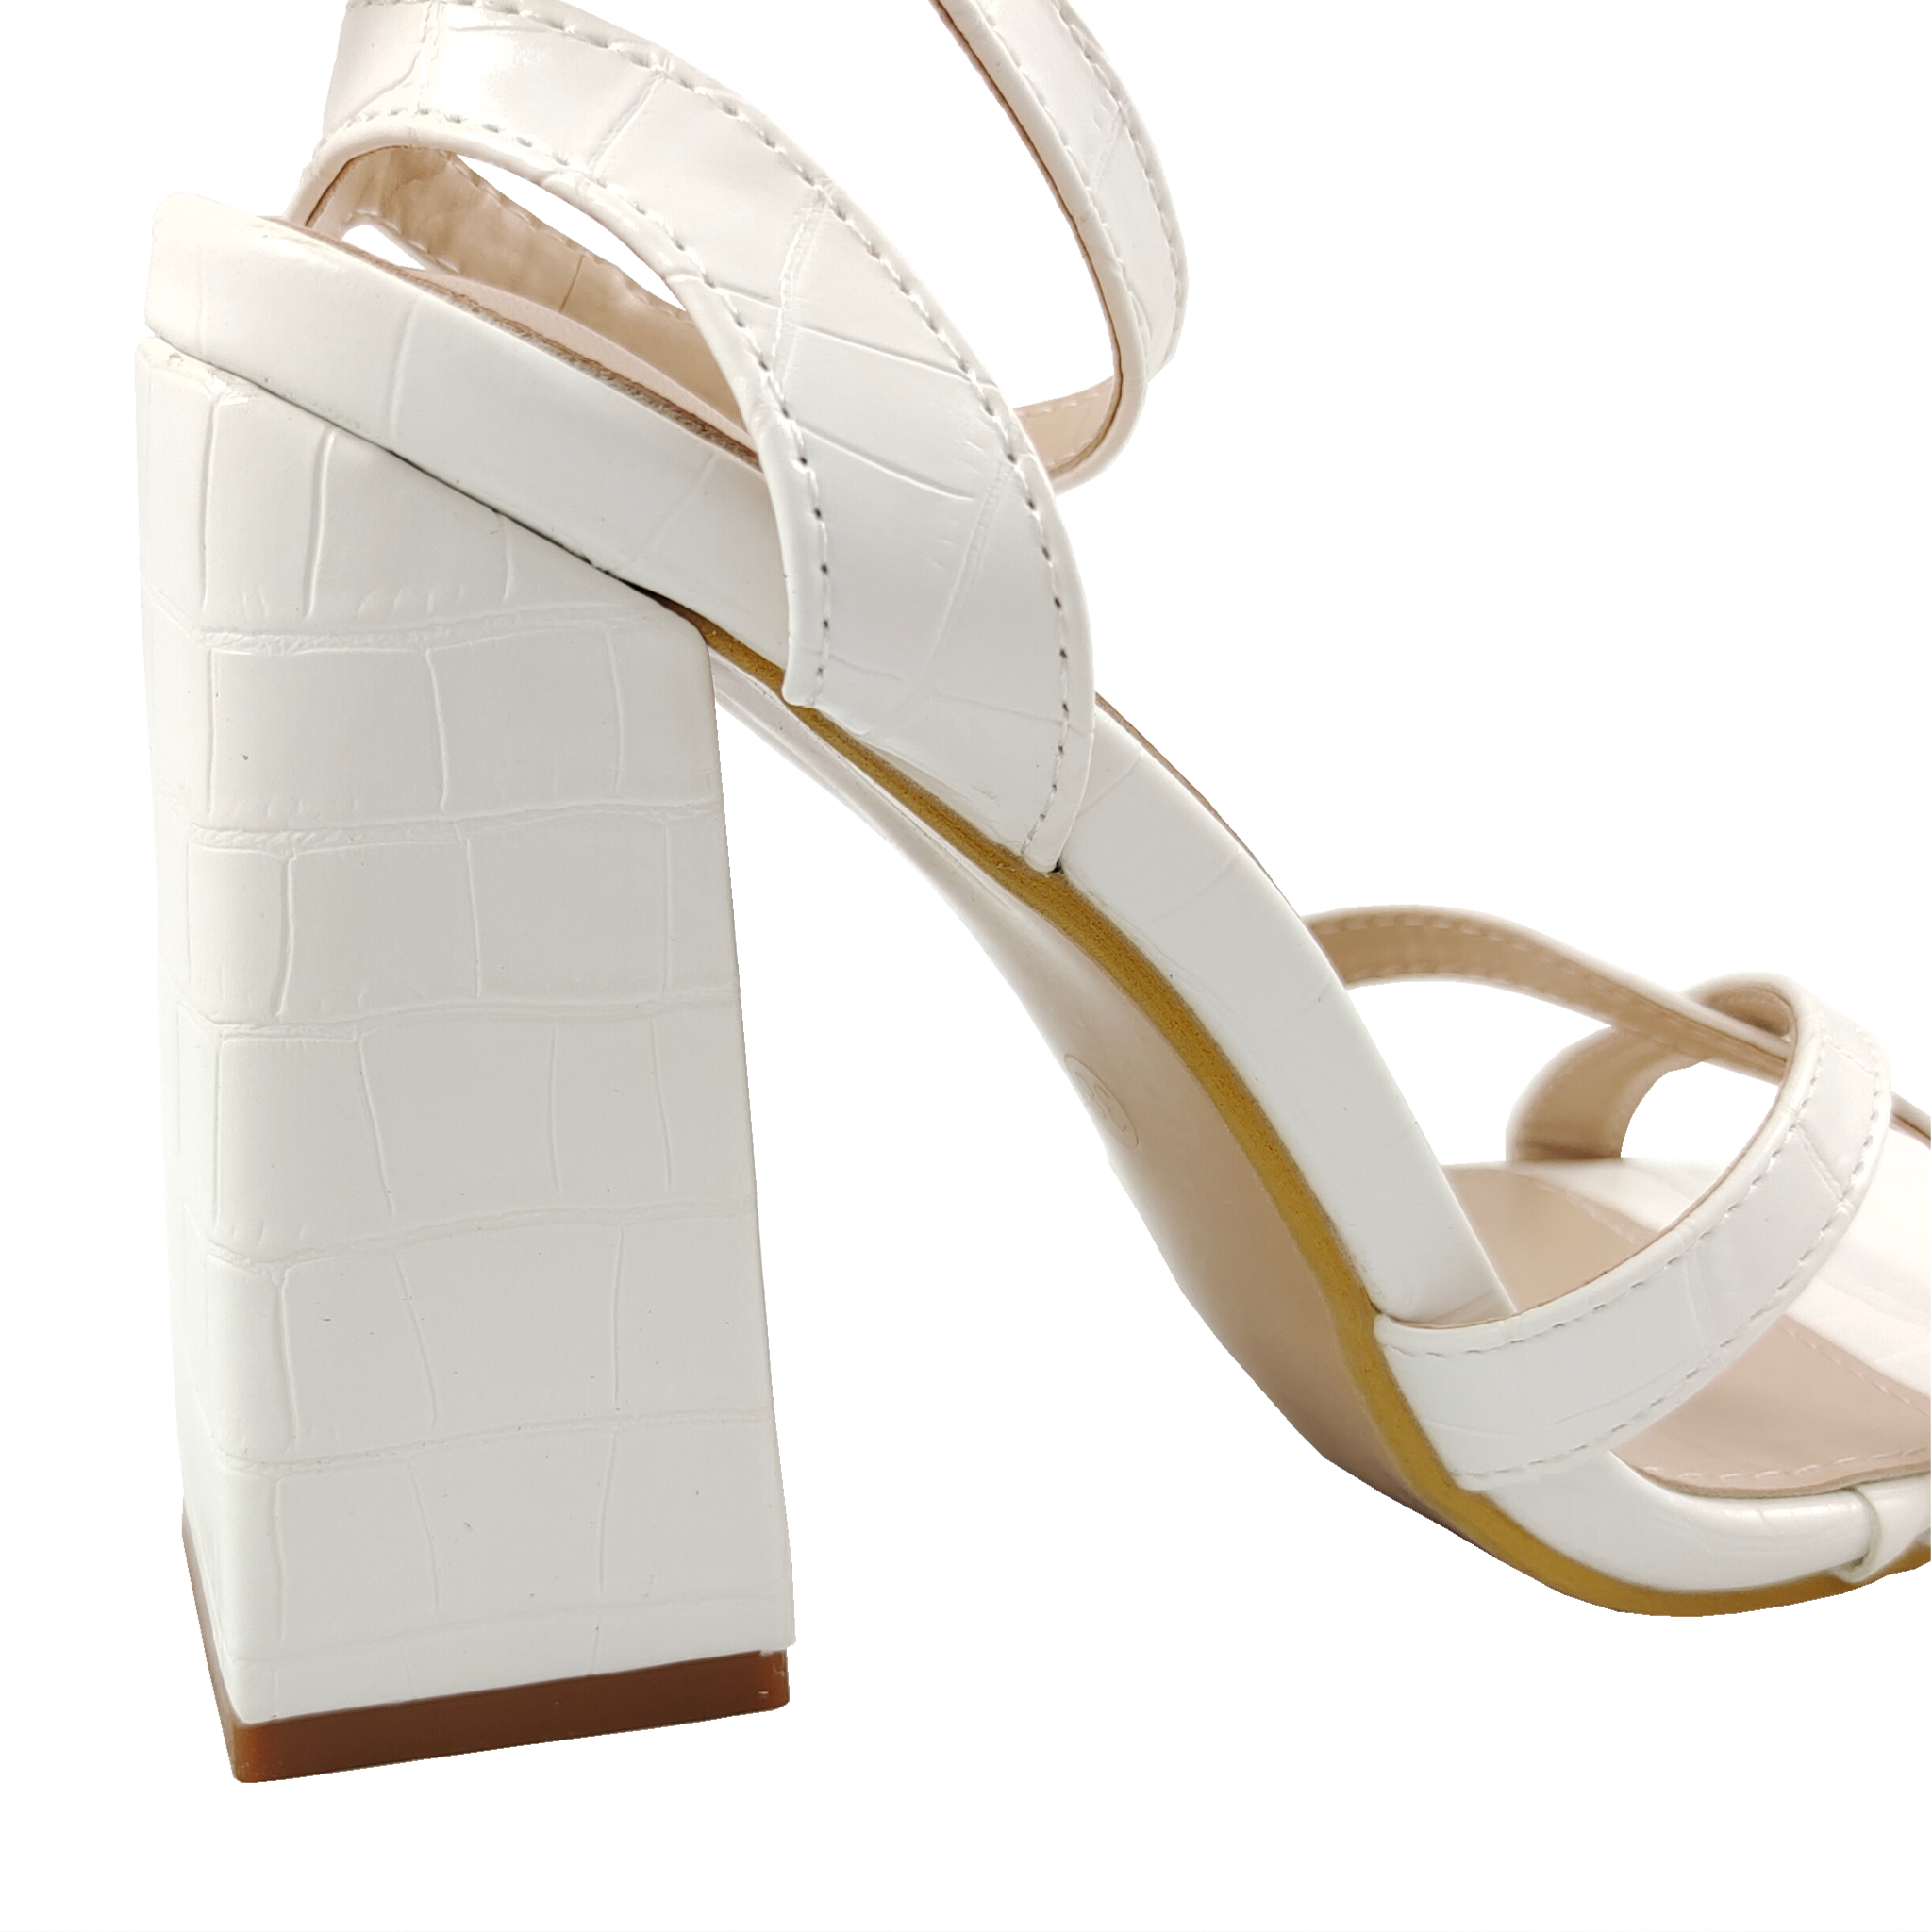 PPT - Explore Our Wide Range of High Heels Online in Australia PowerPoint  Presentation - ID:11688928